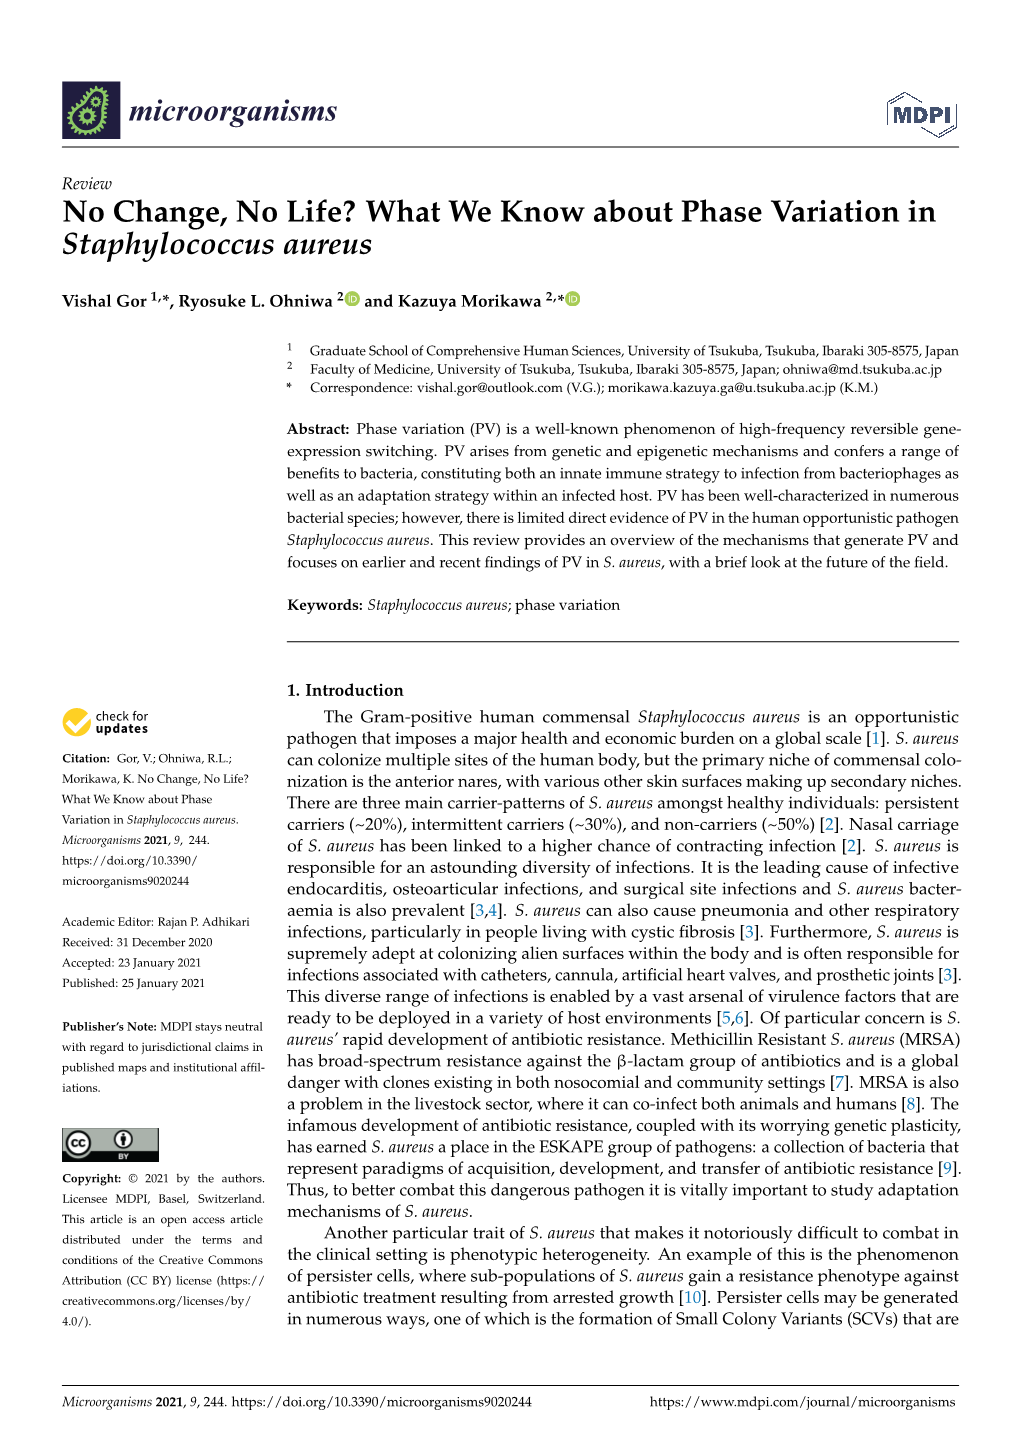 What We Know About Phase Variation in Staphylococcus Aureus